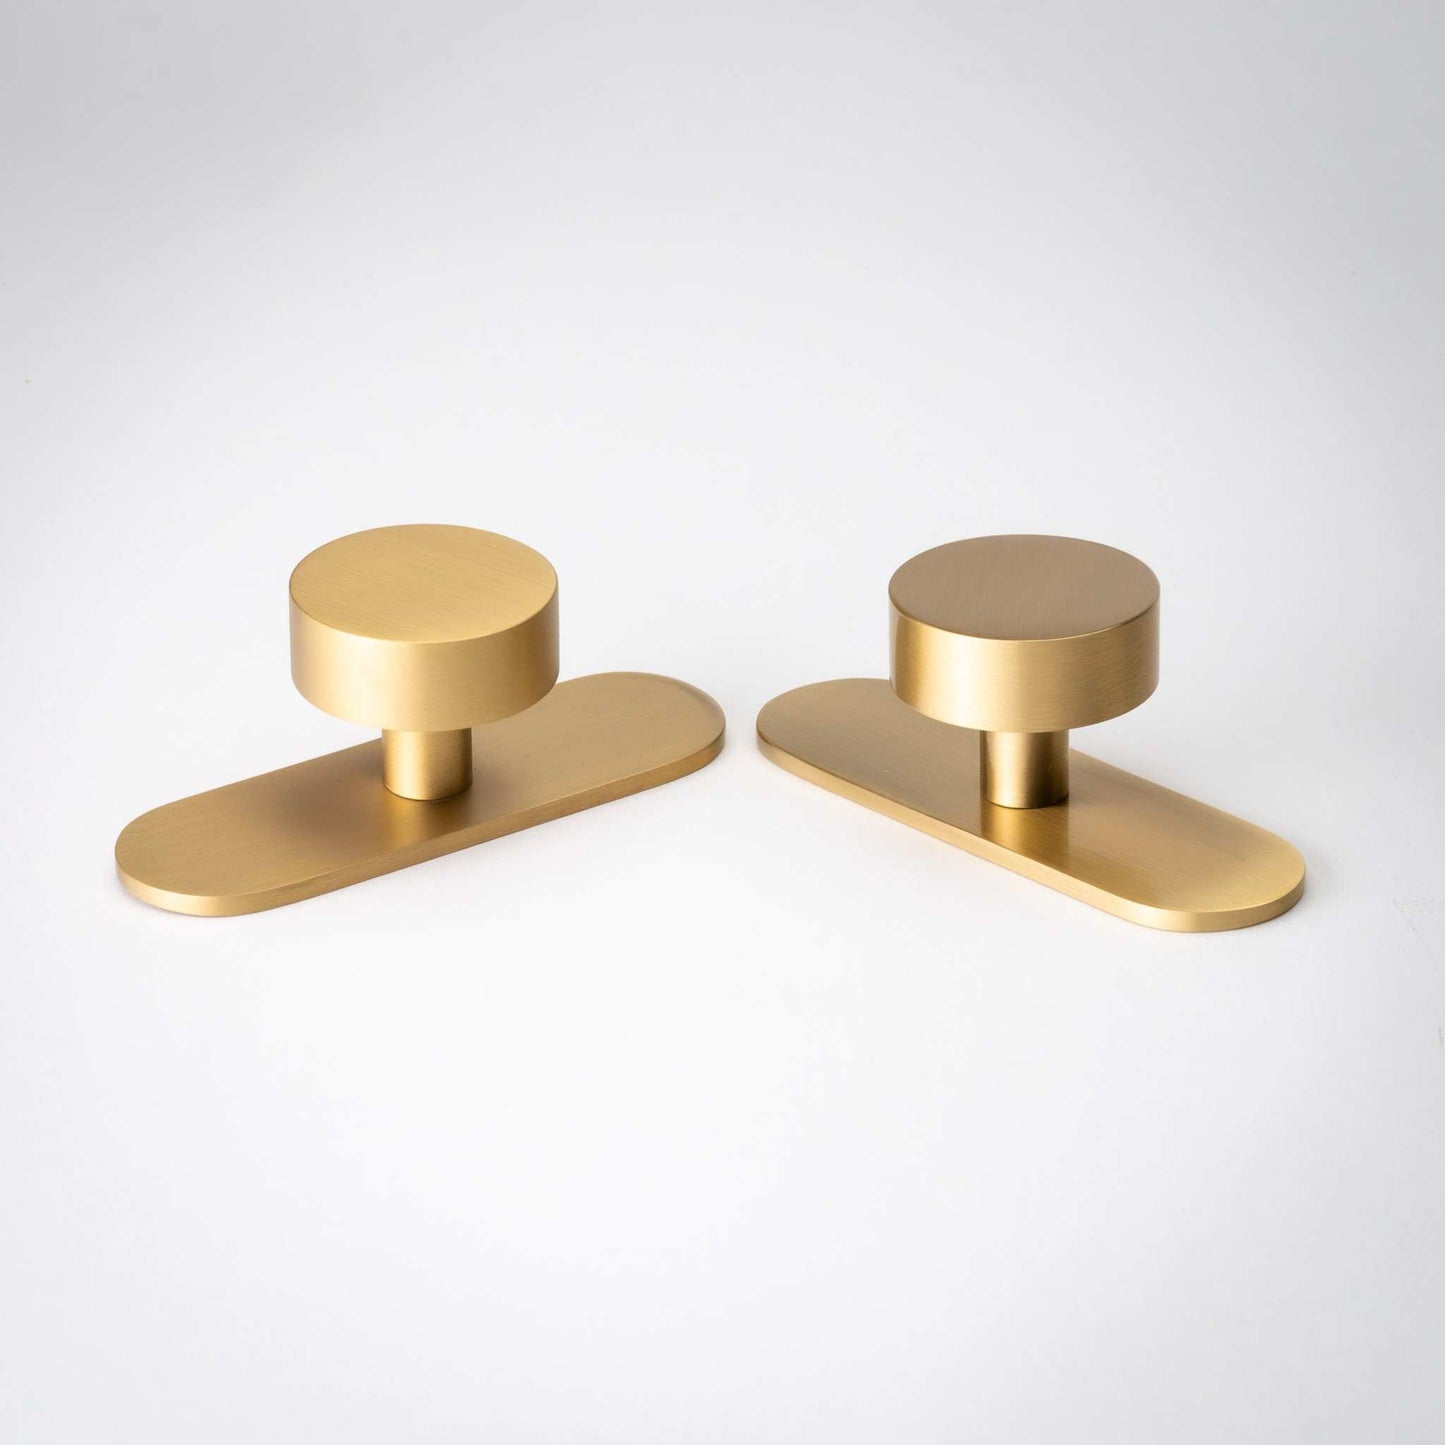 Orbital Knob, Solid Brass Cabinet Knobs Our Orbital Knob adds a touch of simplicity to any contemporary design project. The solid brass construction has an incredible weight in the hand, ensuring it wilknobOrbital Knob, Solid Brass Knobs